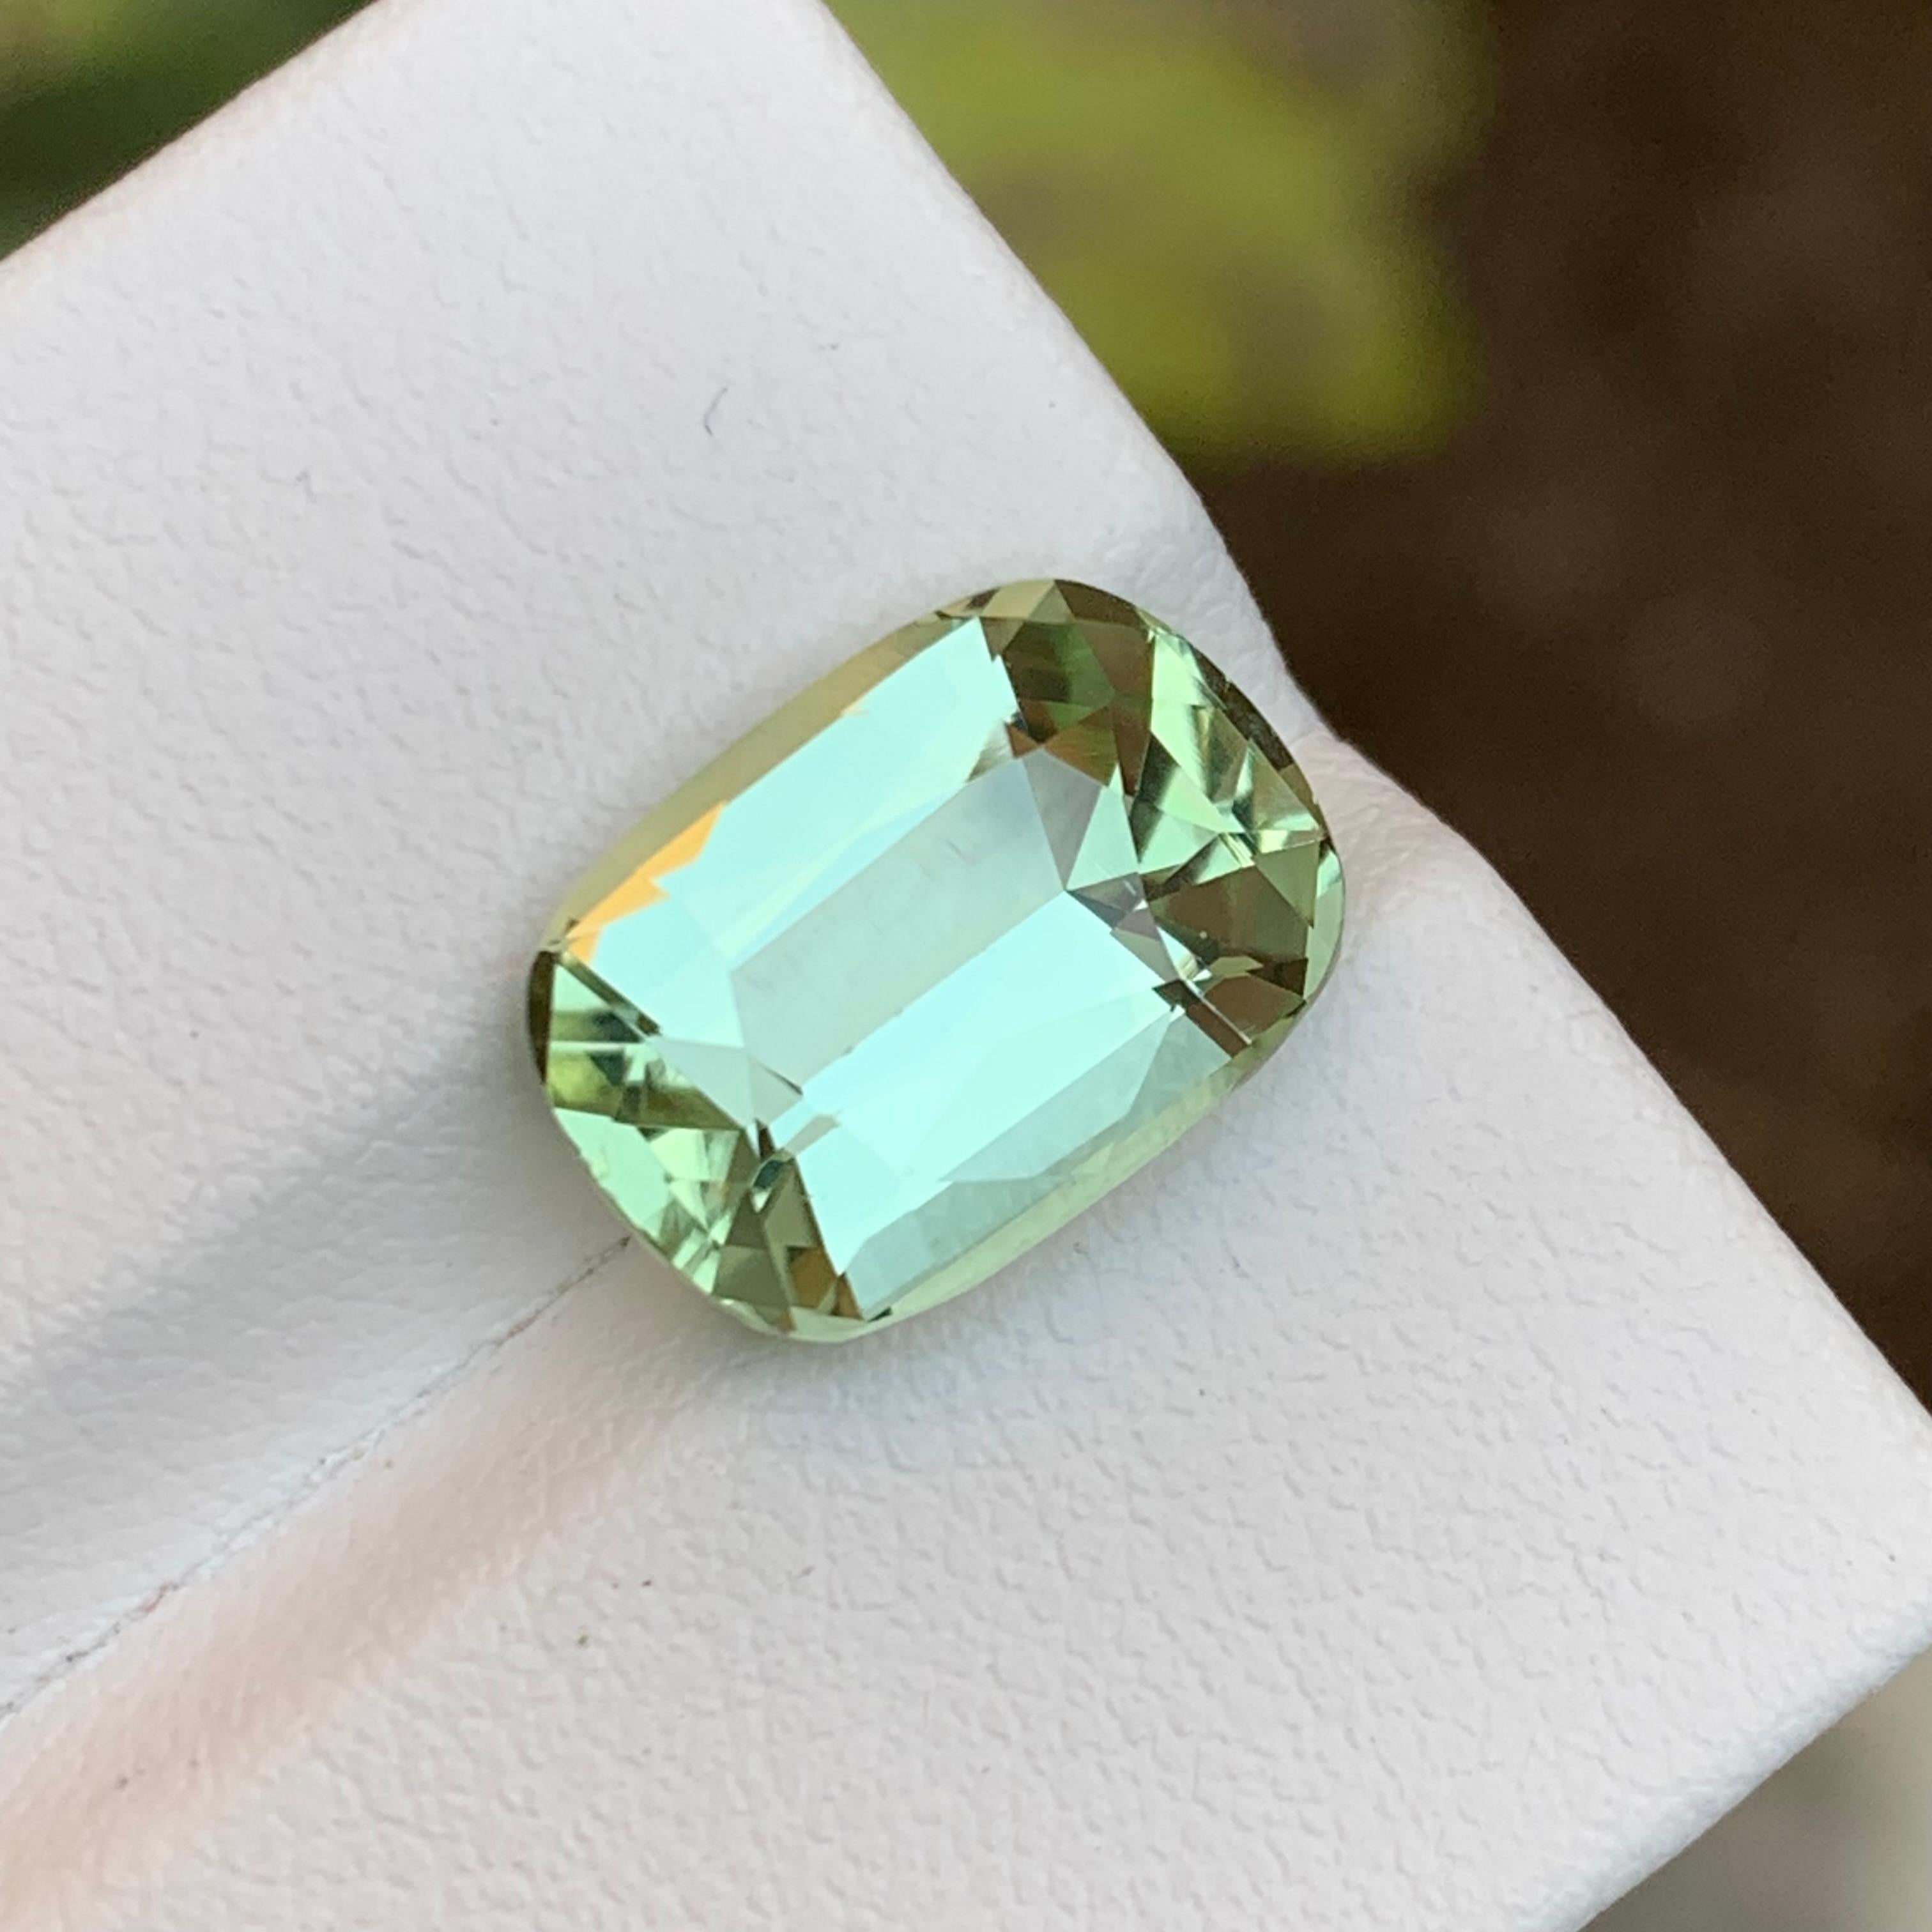 Contemporary Pale Green Natural Tourmaline Gemstone 5.35 Ct Step Cushion Cut for Ring/Pendant For Sale